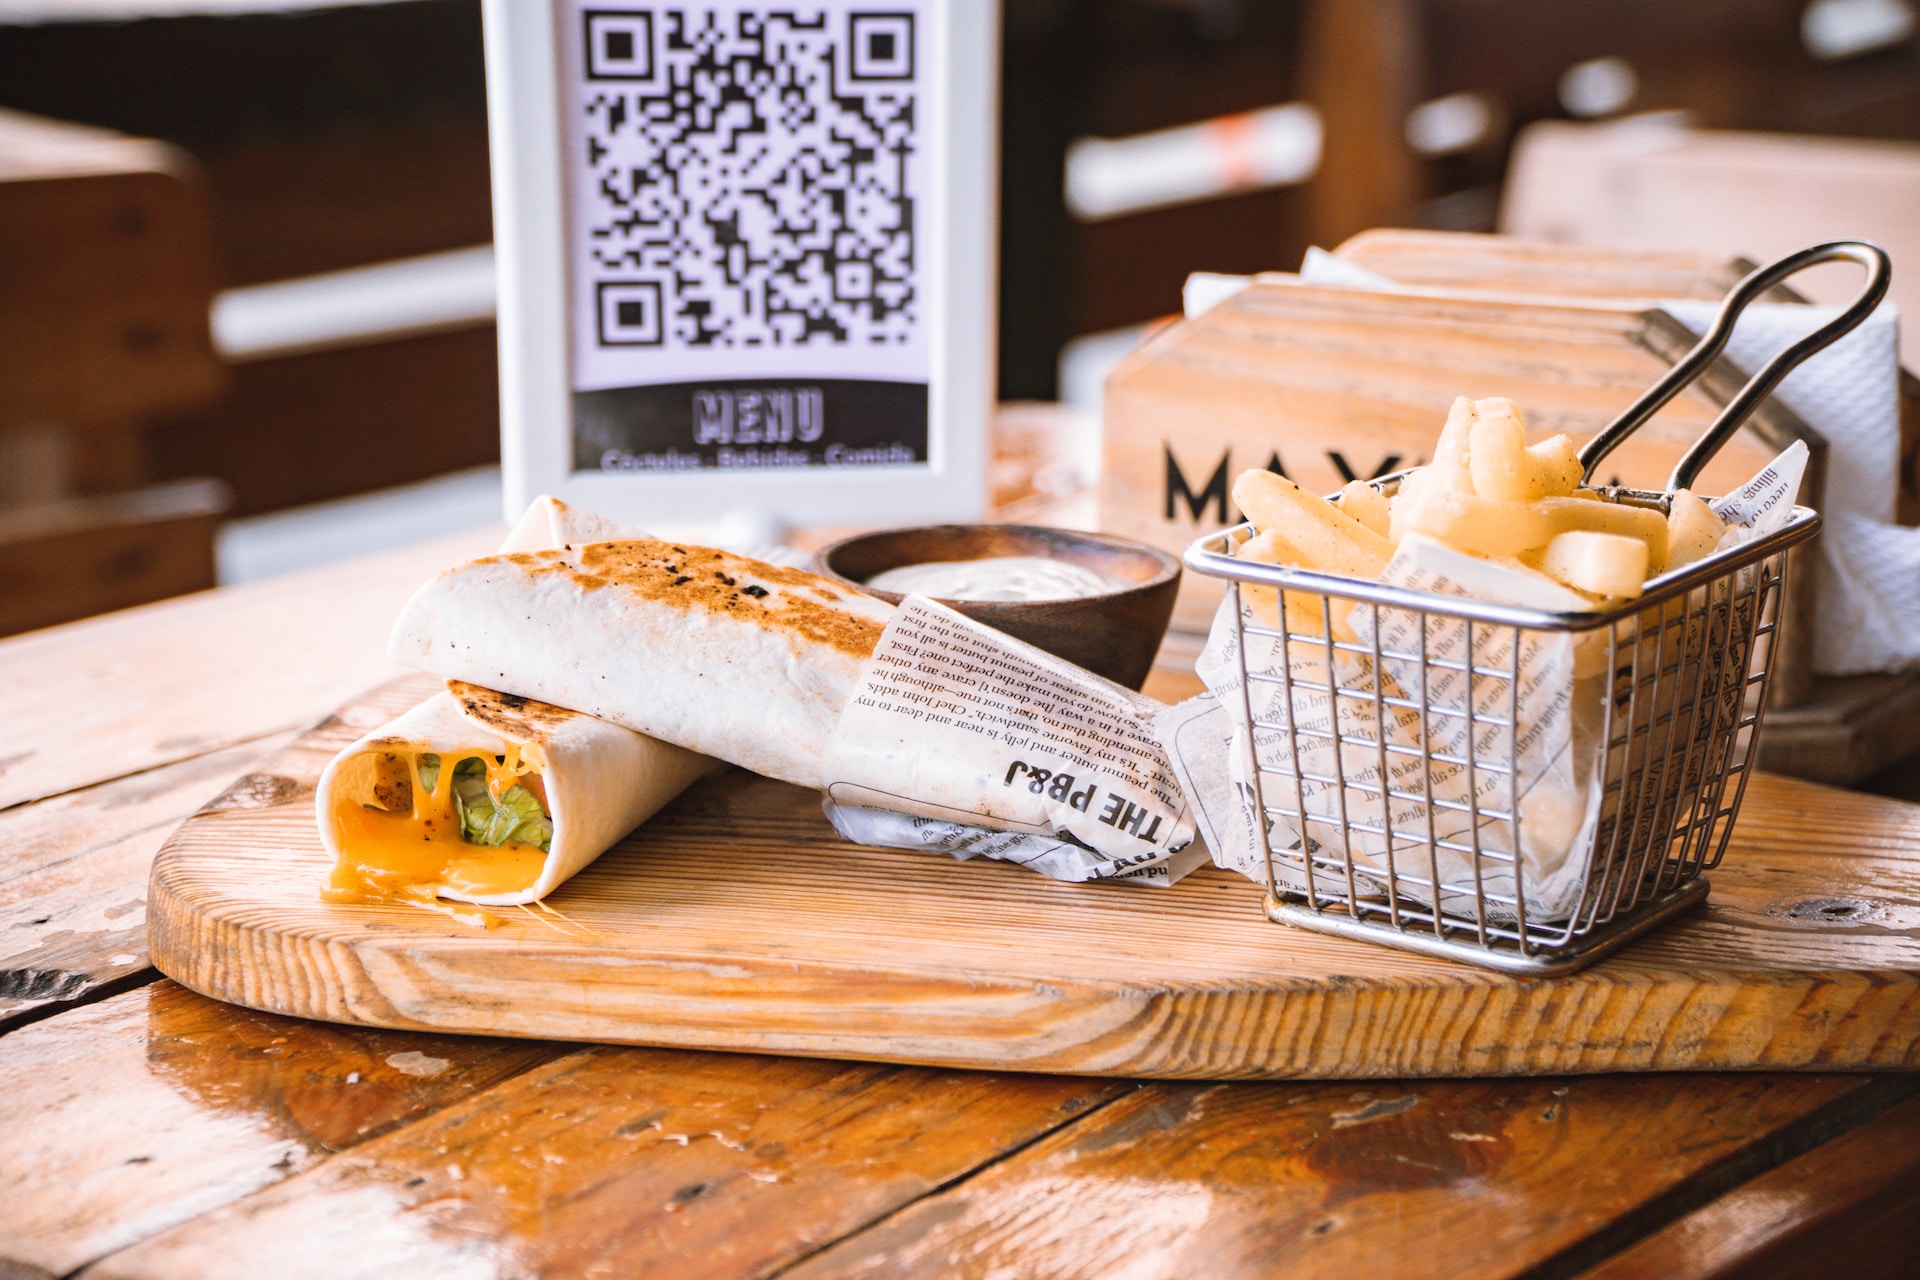 bread basket and qr code menu sitting on table